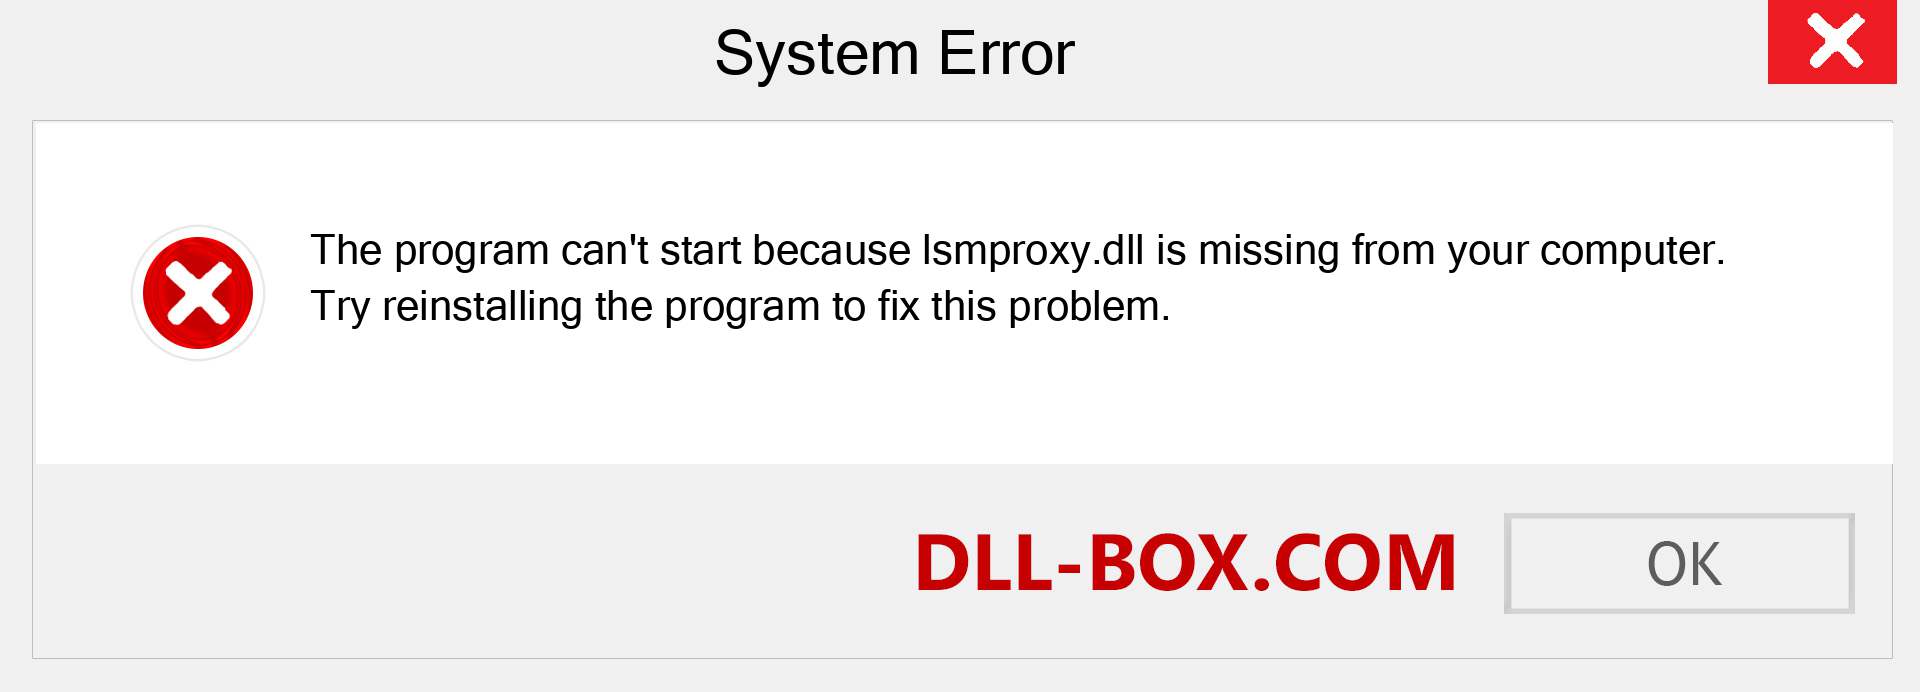  lsmproxy.dll file is missing?. Download for Windows 7, 8, 10 - Fix  lsmproxy dll Missing Error on Windows, photos, images